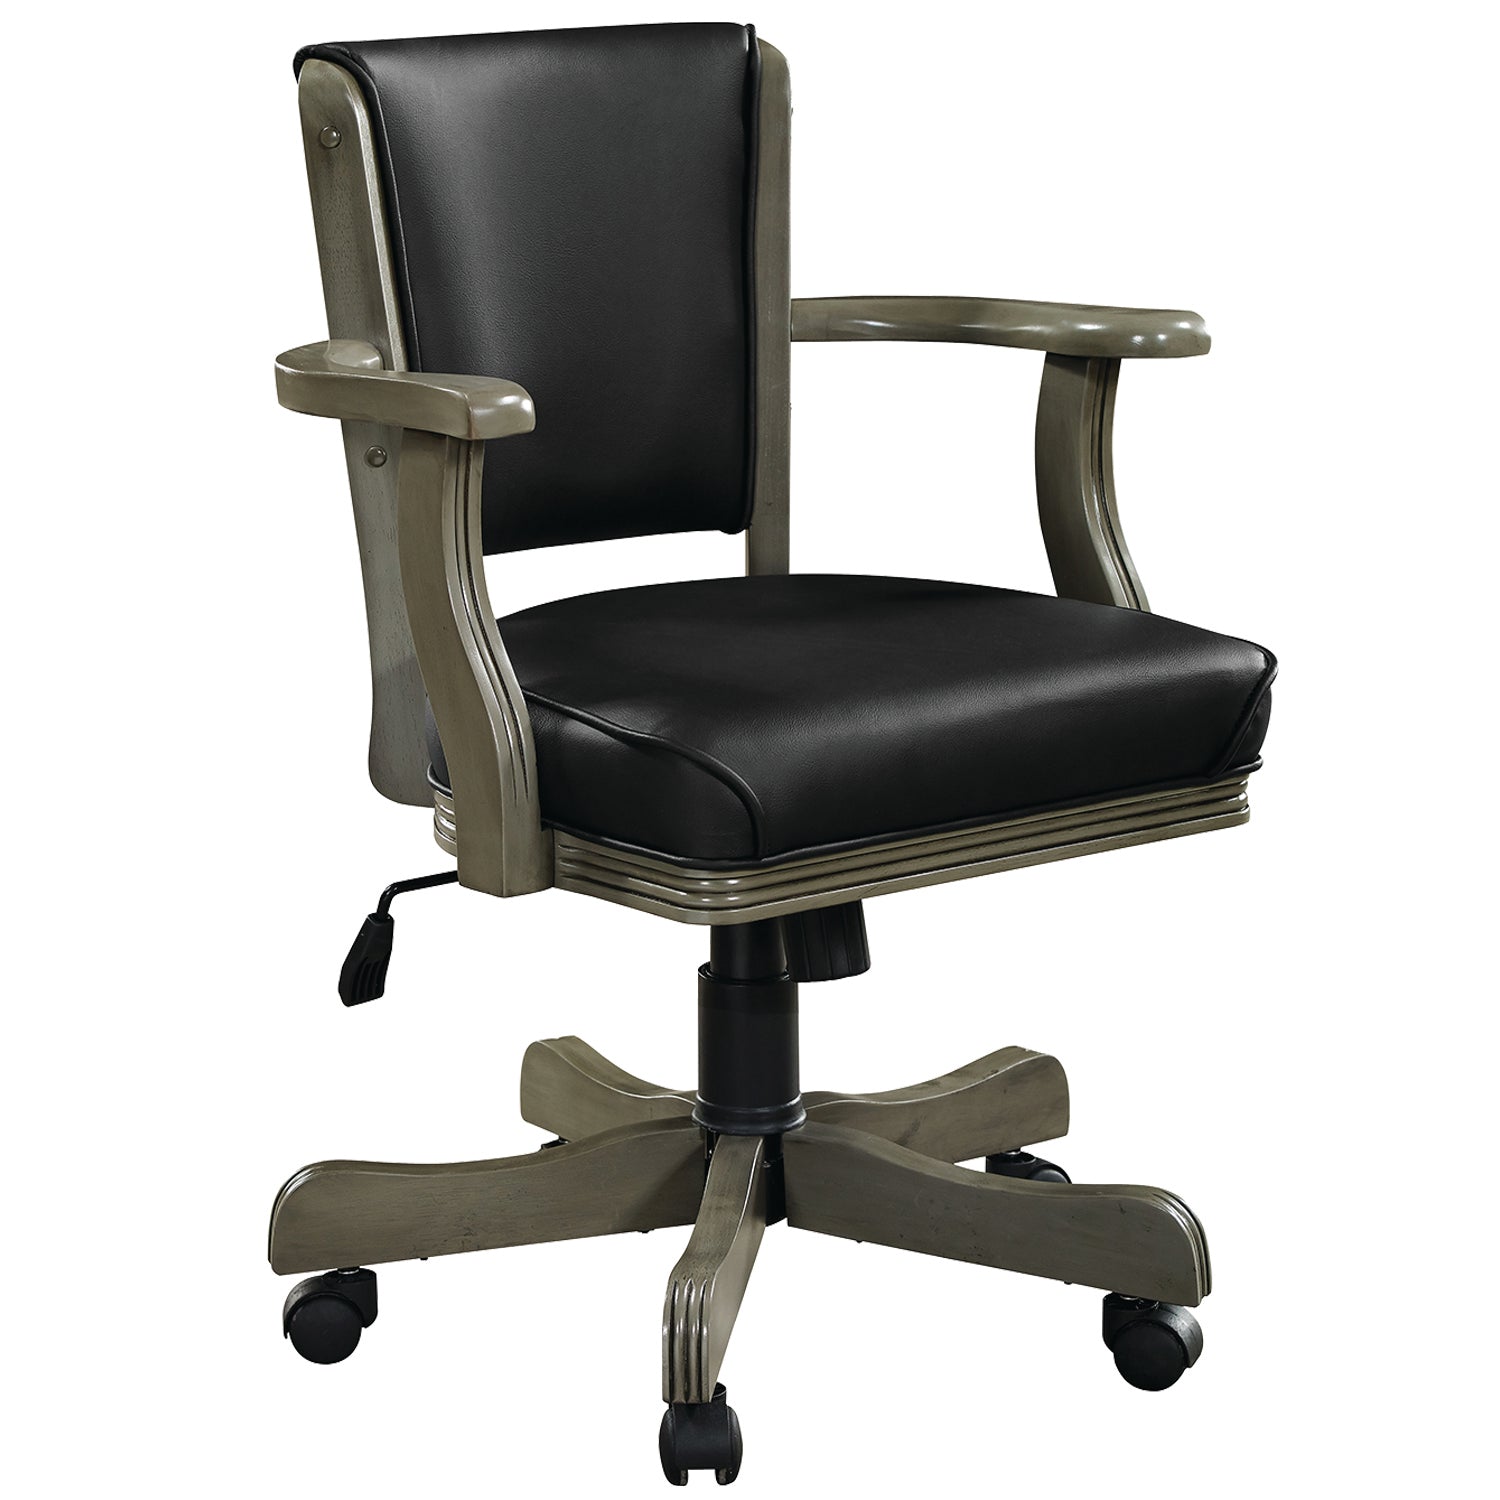 Vinyl padded swivel game chair with arm rests in a slate finish.